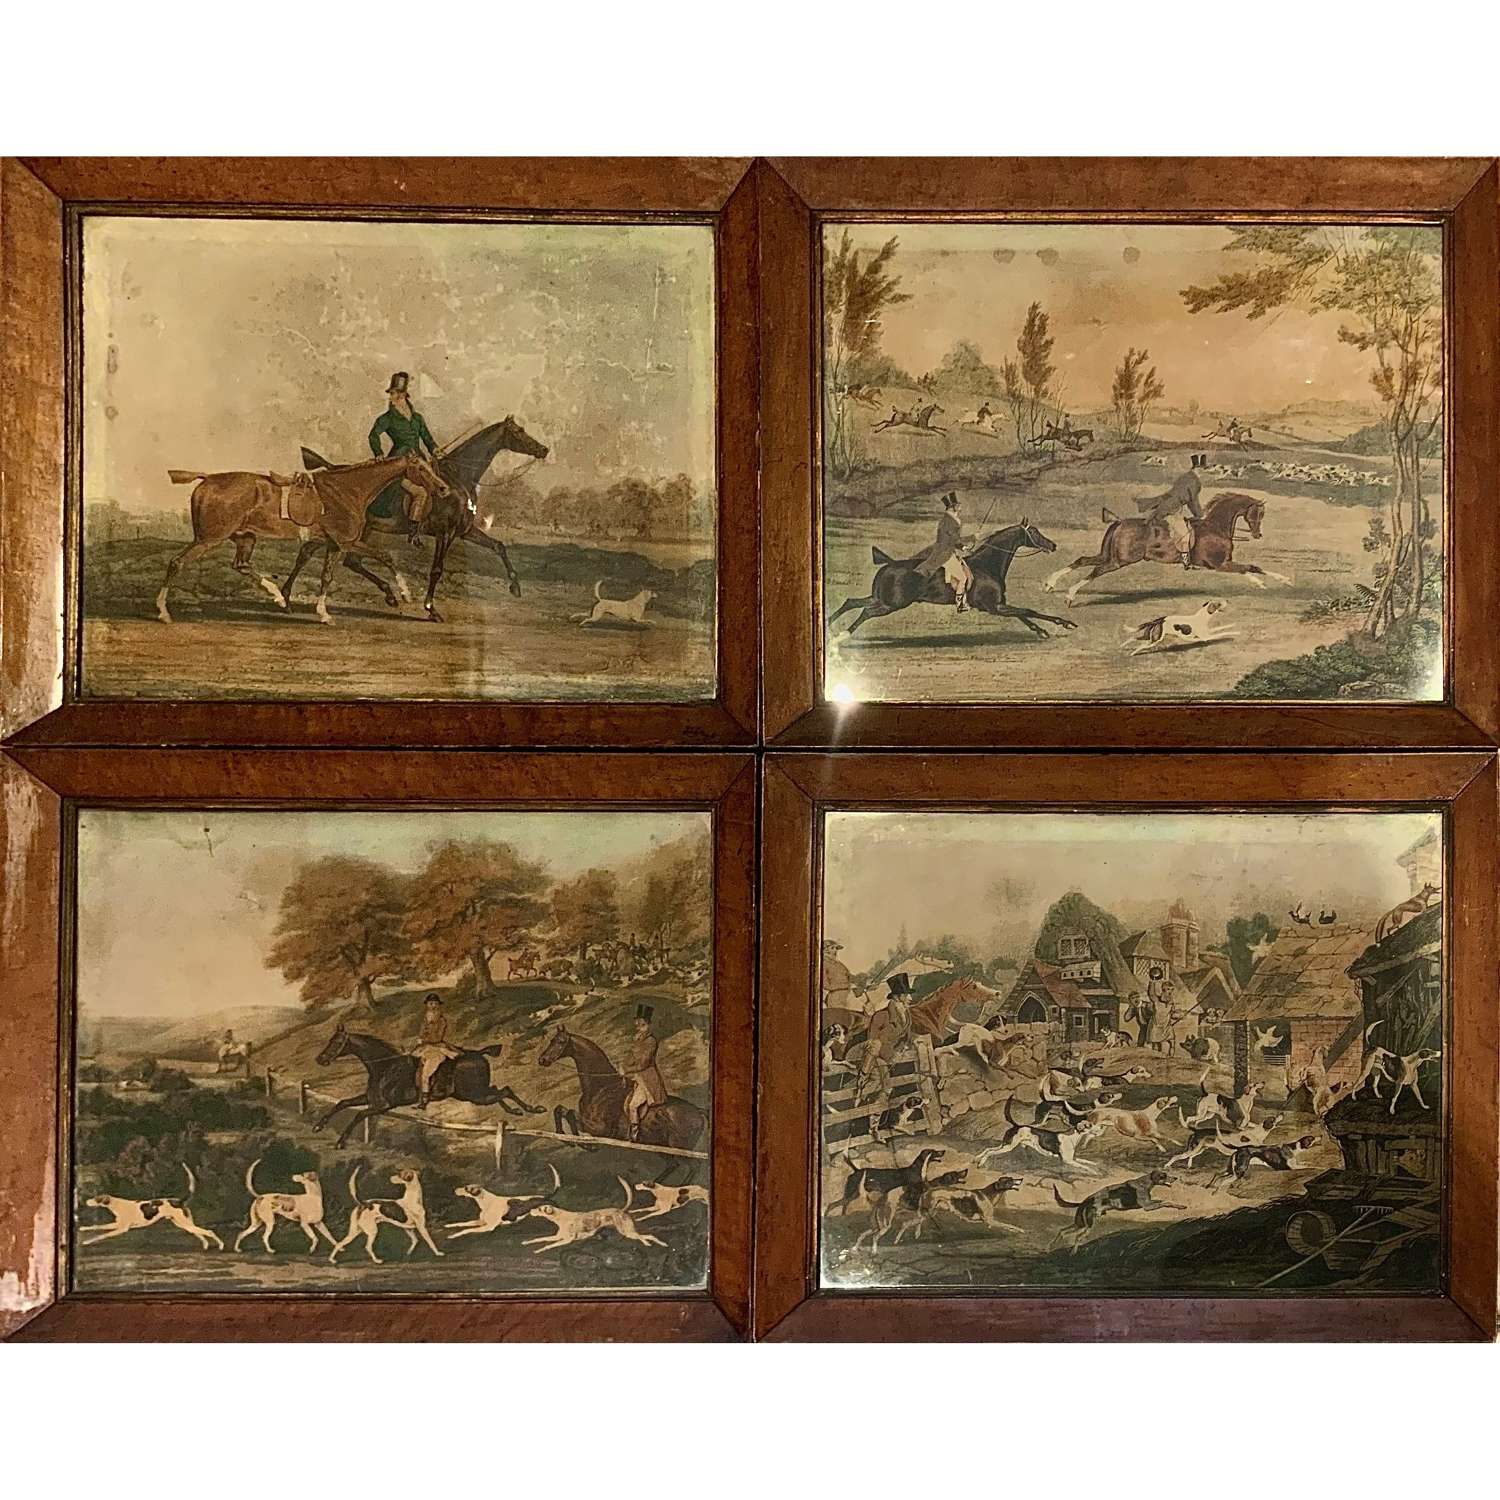 A Magnificent Set of Four (4) Large 19th Century Hunting Prints